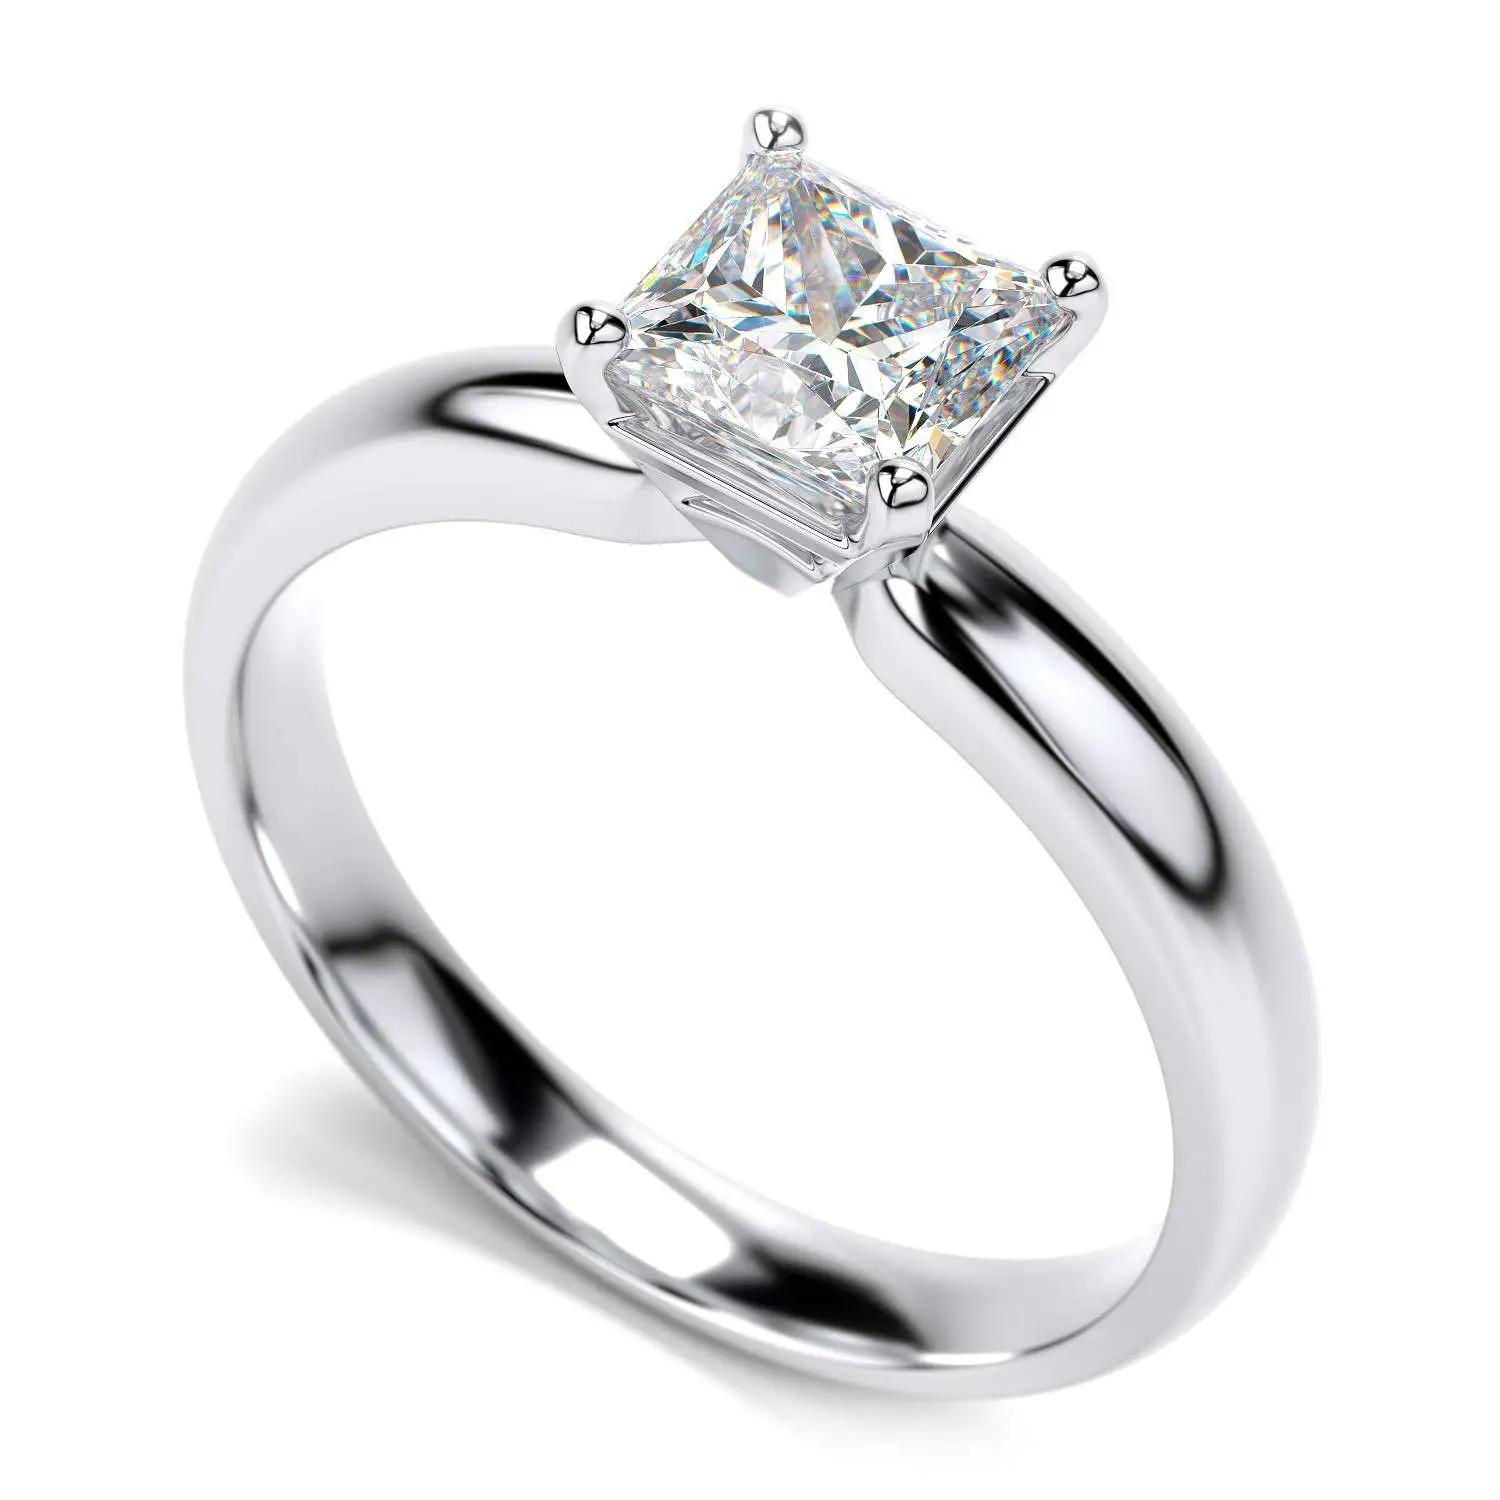 14K White Gold Diamond Princess Cut Solitaire Engagement Ring, .44 ct I ...